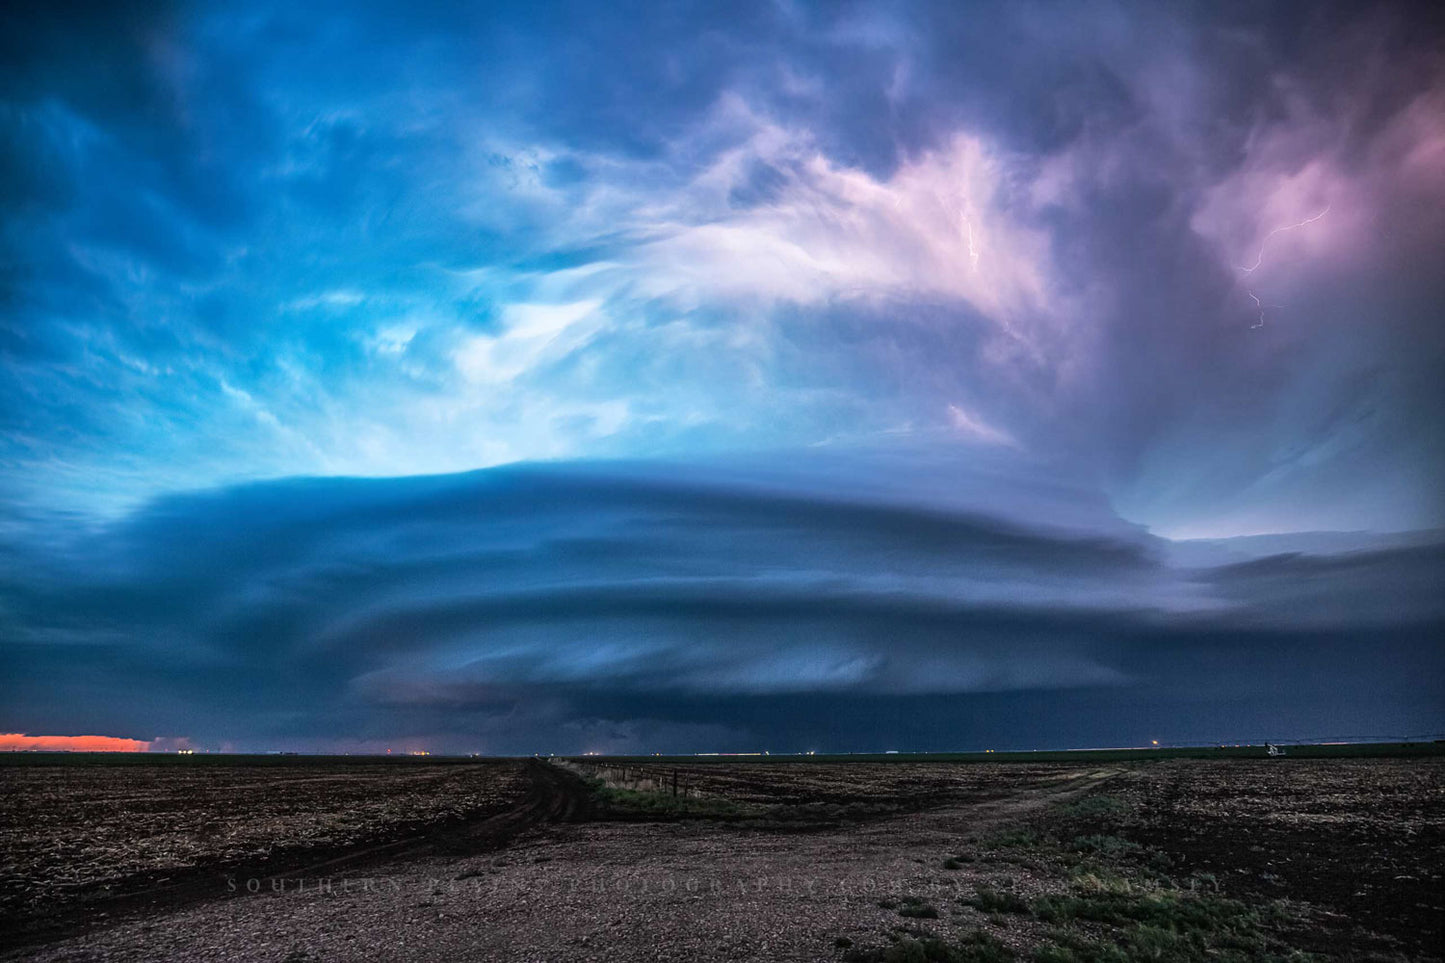 Storm photography print of a supercell thunderstorm illuminated by lightning after dark on a stormy night in Kansas by Sean Ramsey of Southern Plains Photography.